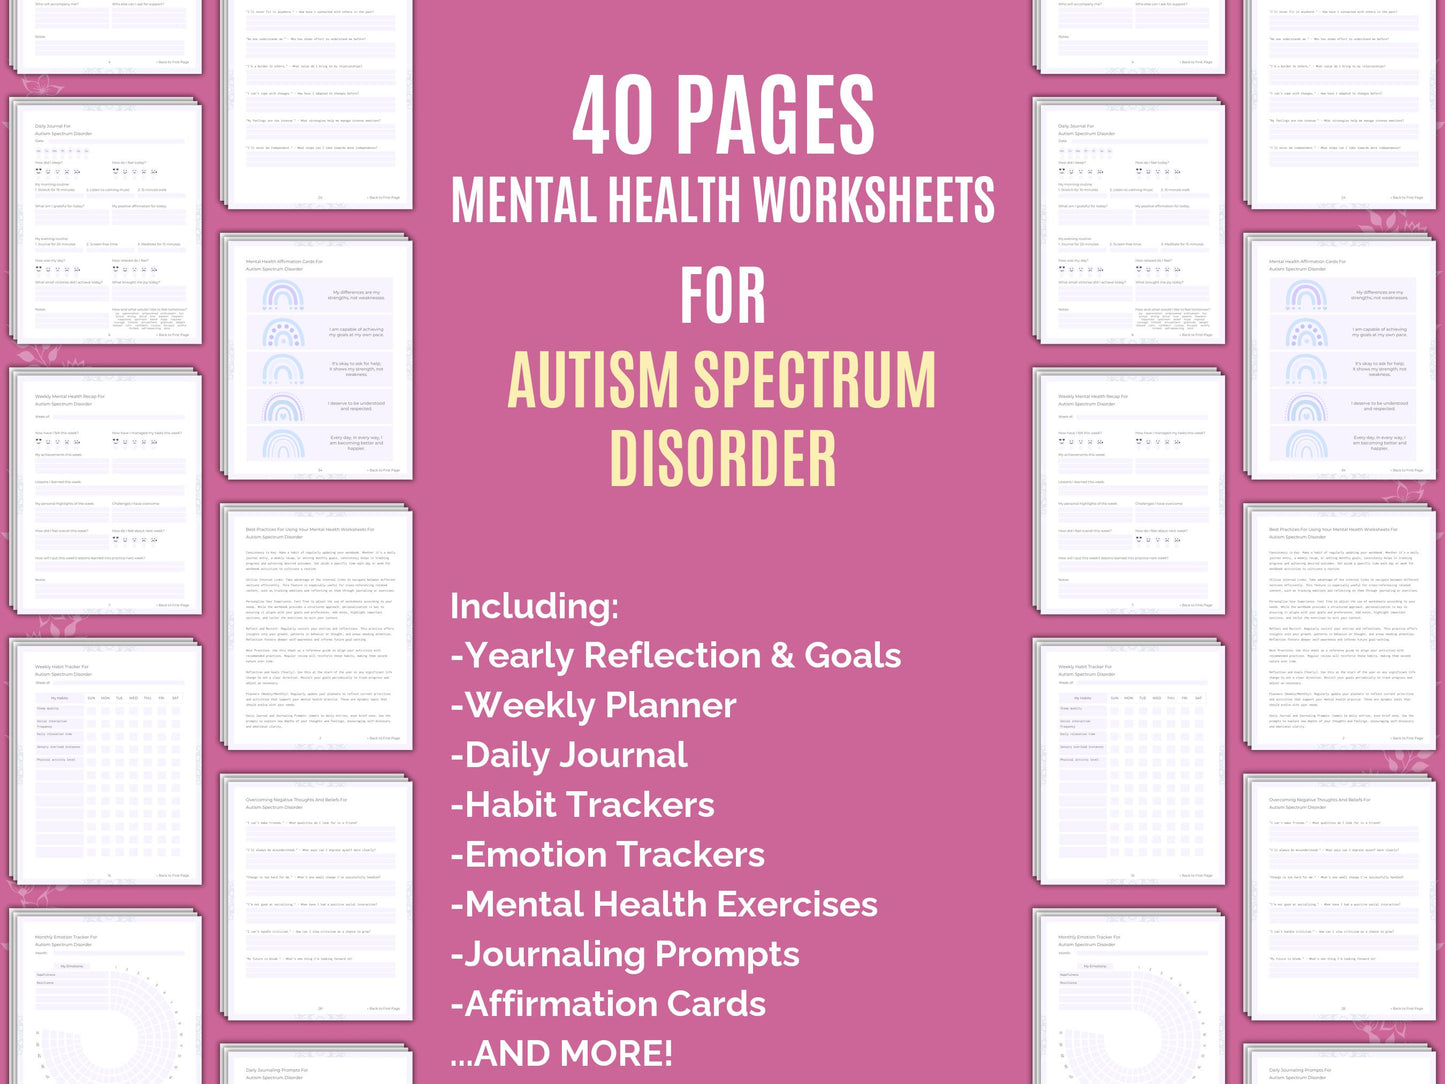 Resources, Cheat Sheet, Templates, Counseling, Planners, Tools, Workbooks, Notes, Therapy, Journaling, Autism Spectrum Disorder Mental Health, Journals, Goal Setting